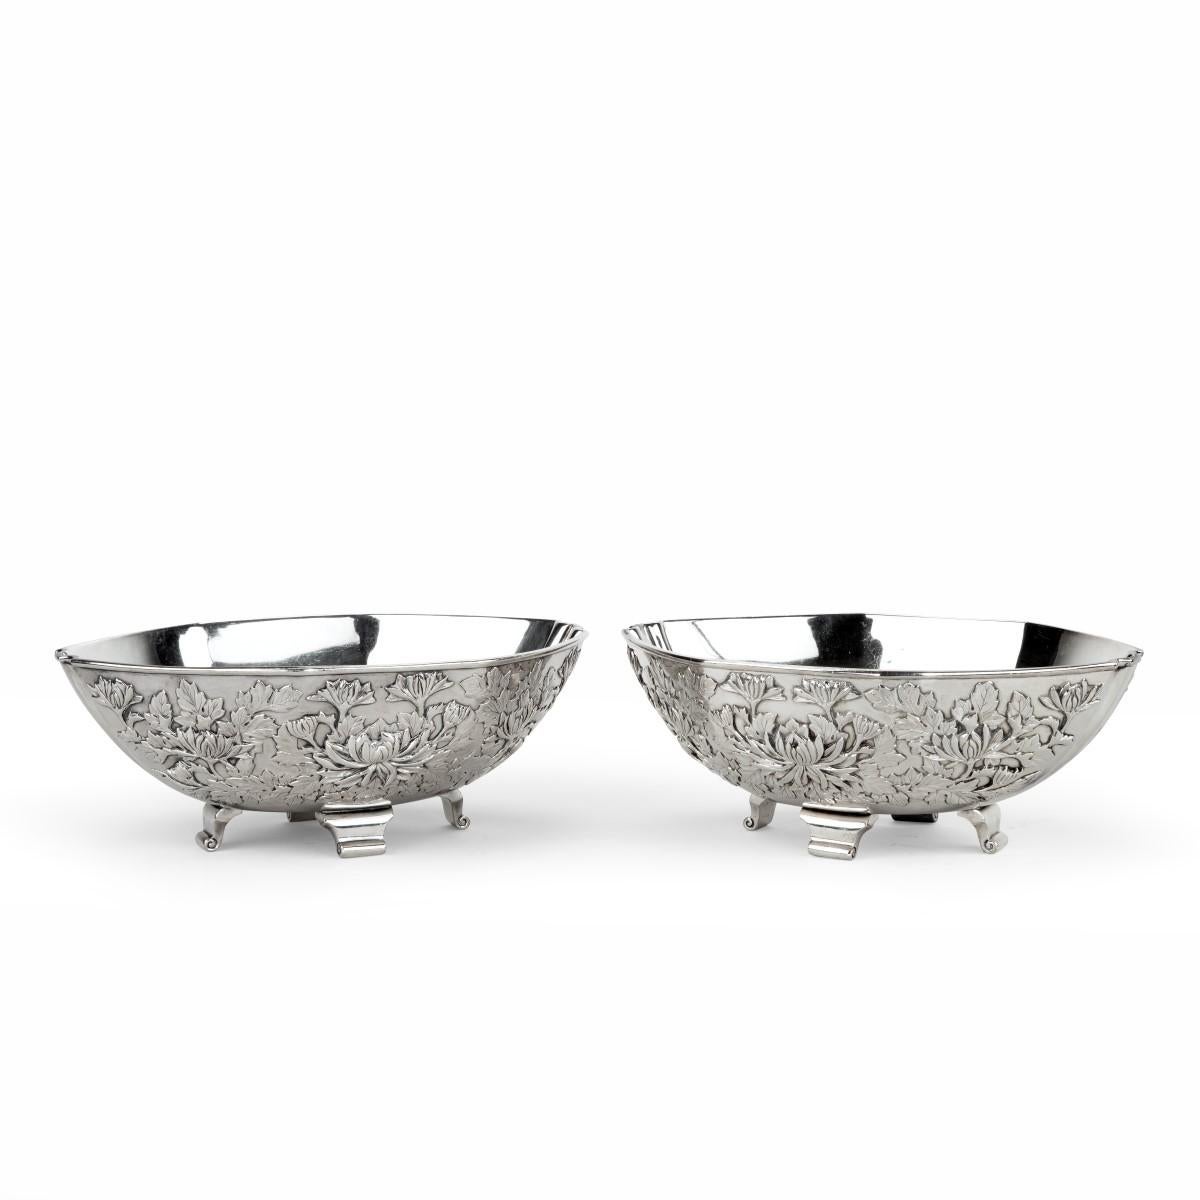 A pair of Meiji period solid silver bowls by Eigyoku, each of lobed oval form on four scroll feet, deeply embossed with continuous chrysanthemum heads and leaves. Japanese, circa 1910.